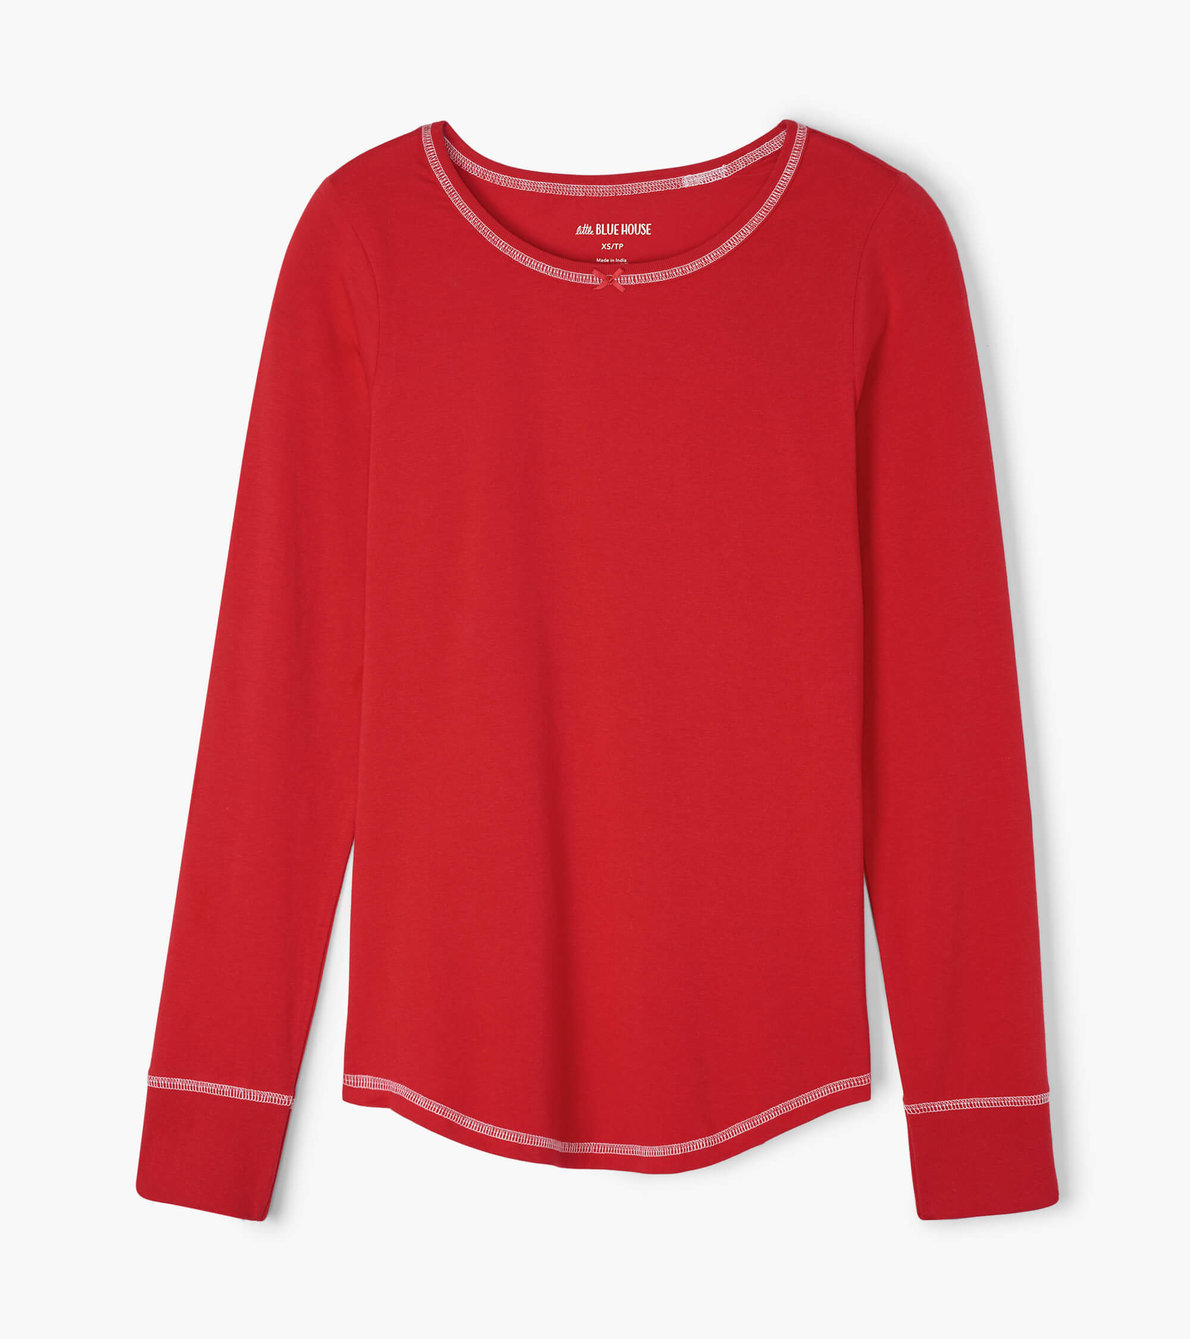 View larger image of Holiday Red Women's Stretch Jersey Top